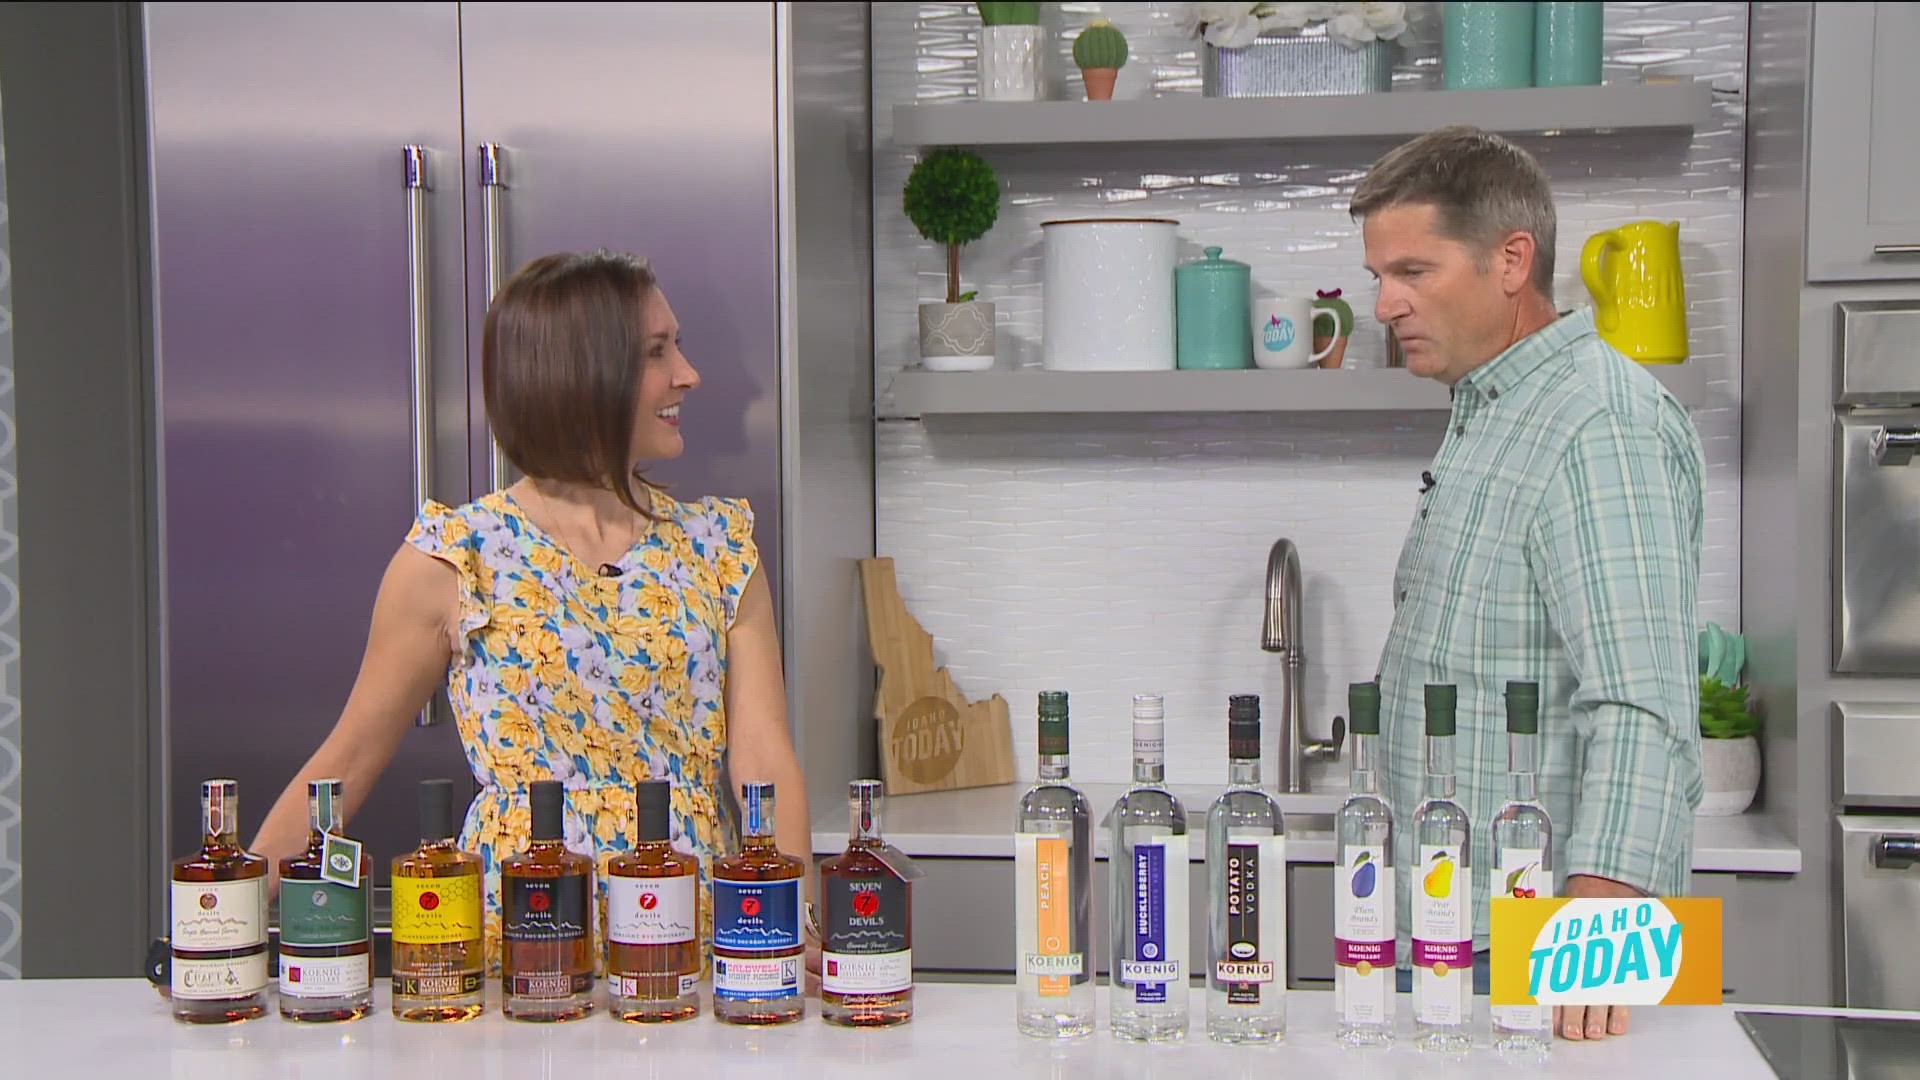 Andy Koenig with local business Koenig Distillery stops by the studio to share about his distillery.